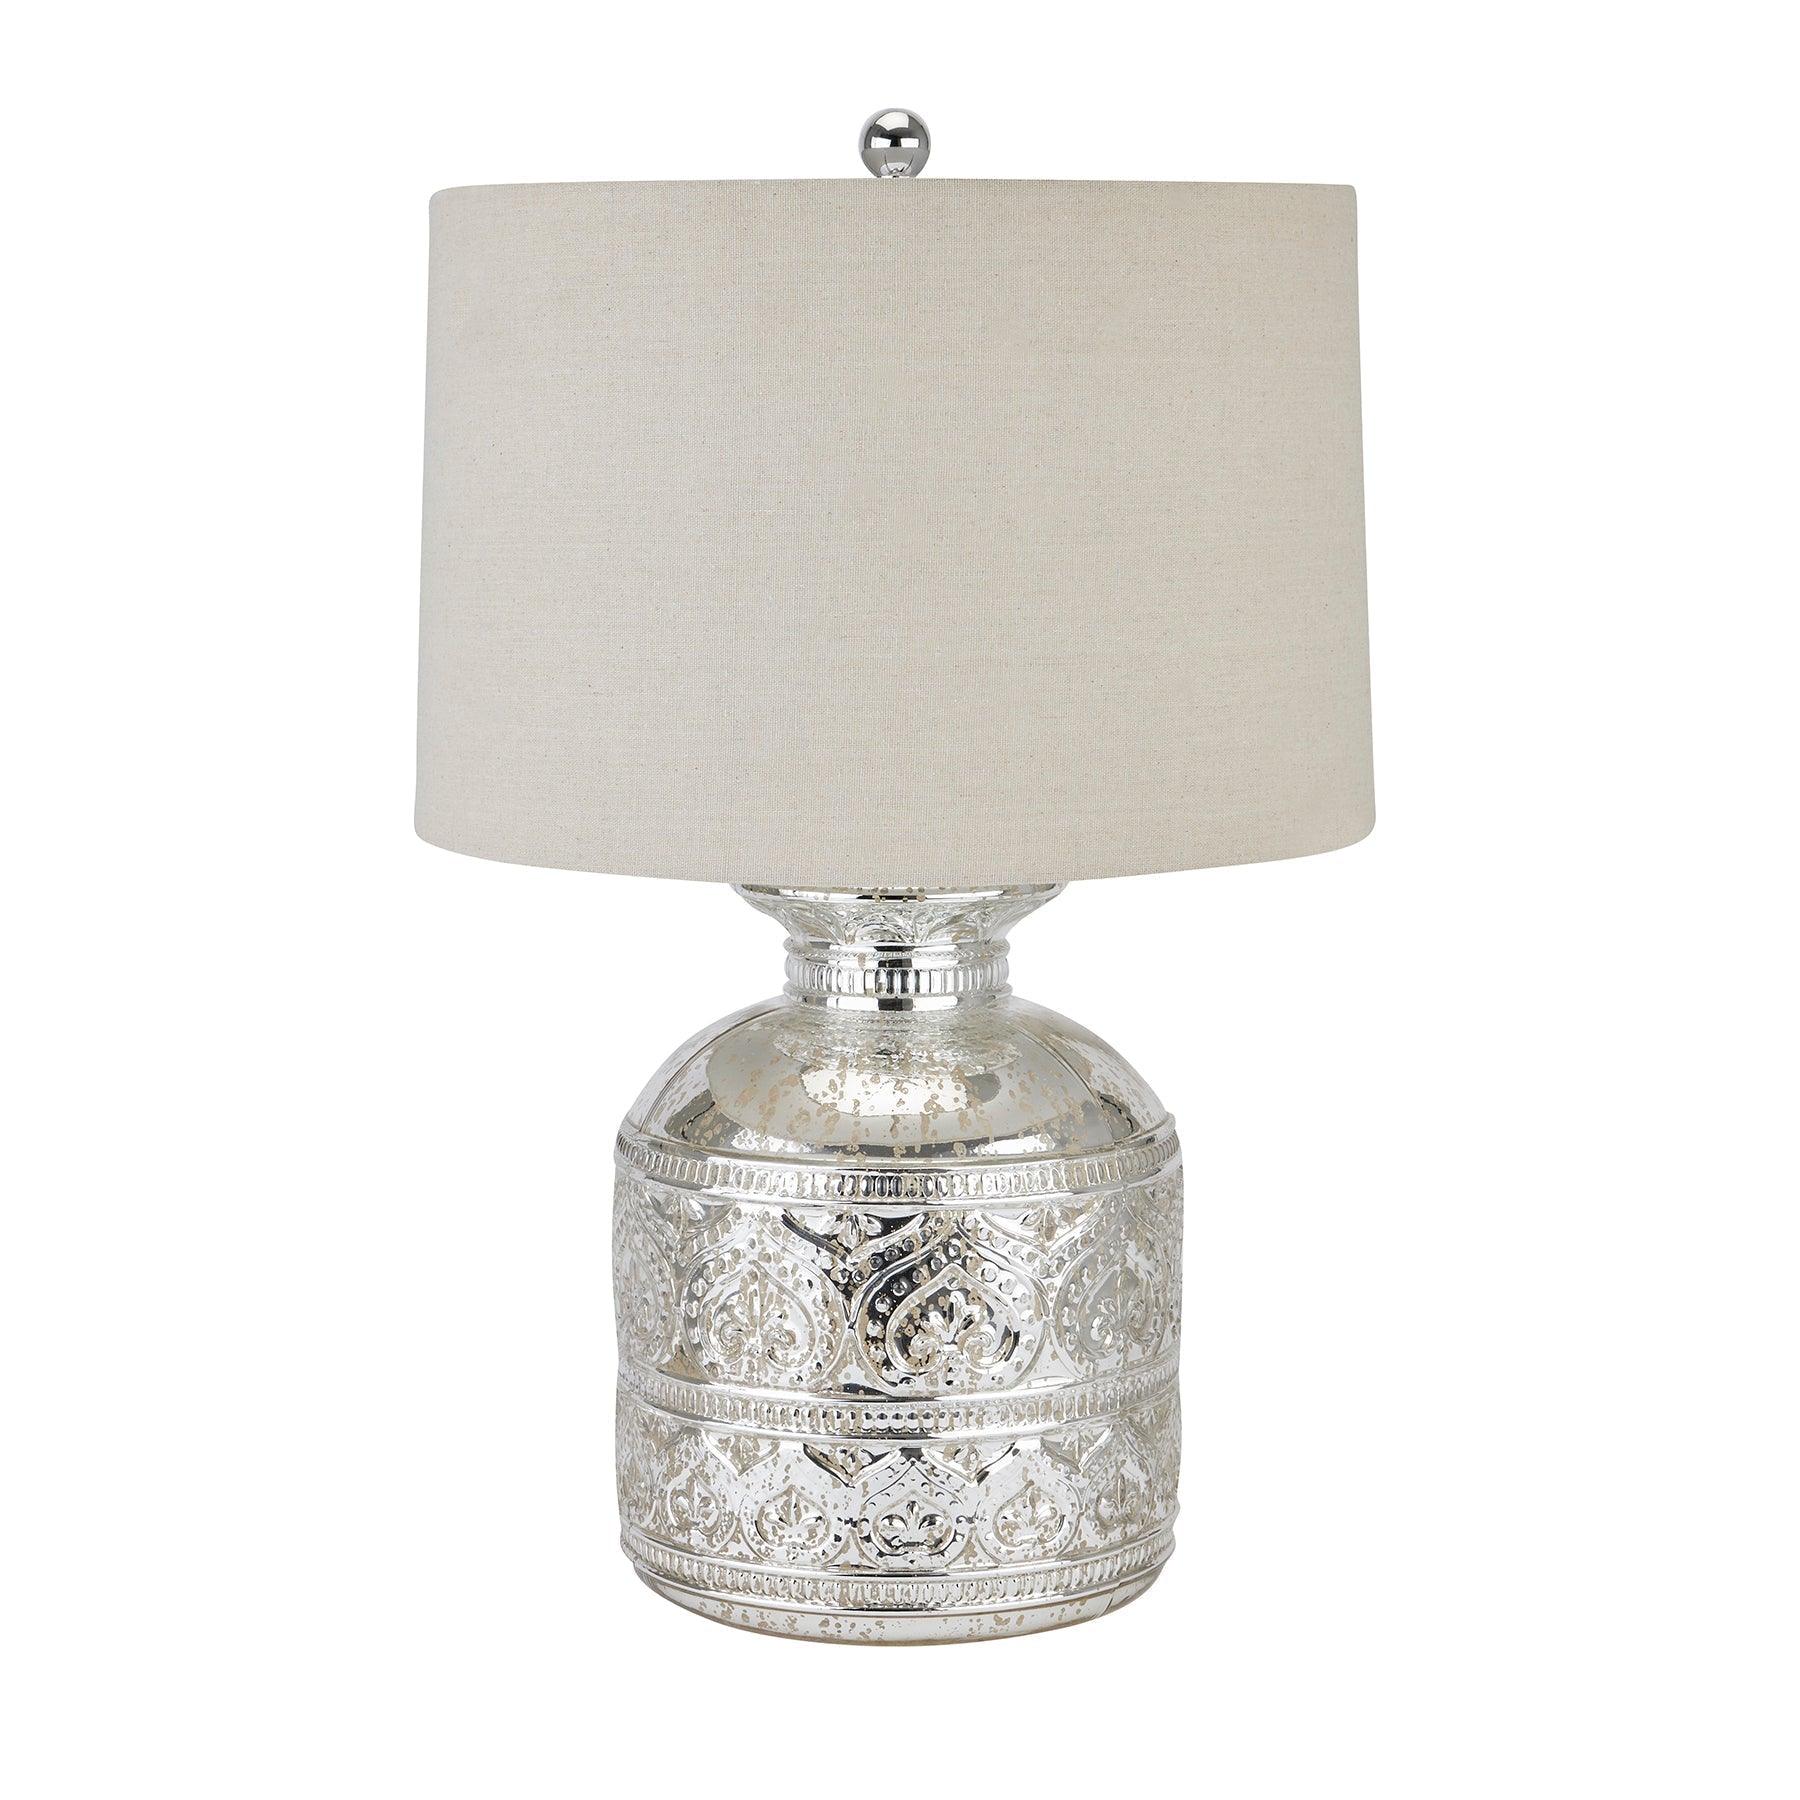 Darcy Mercury Glass Table Lamp - Vookoo Lifestyle